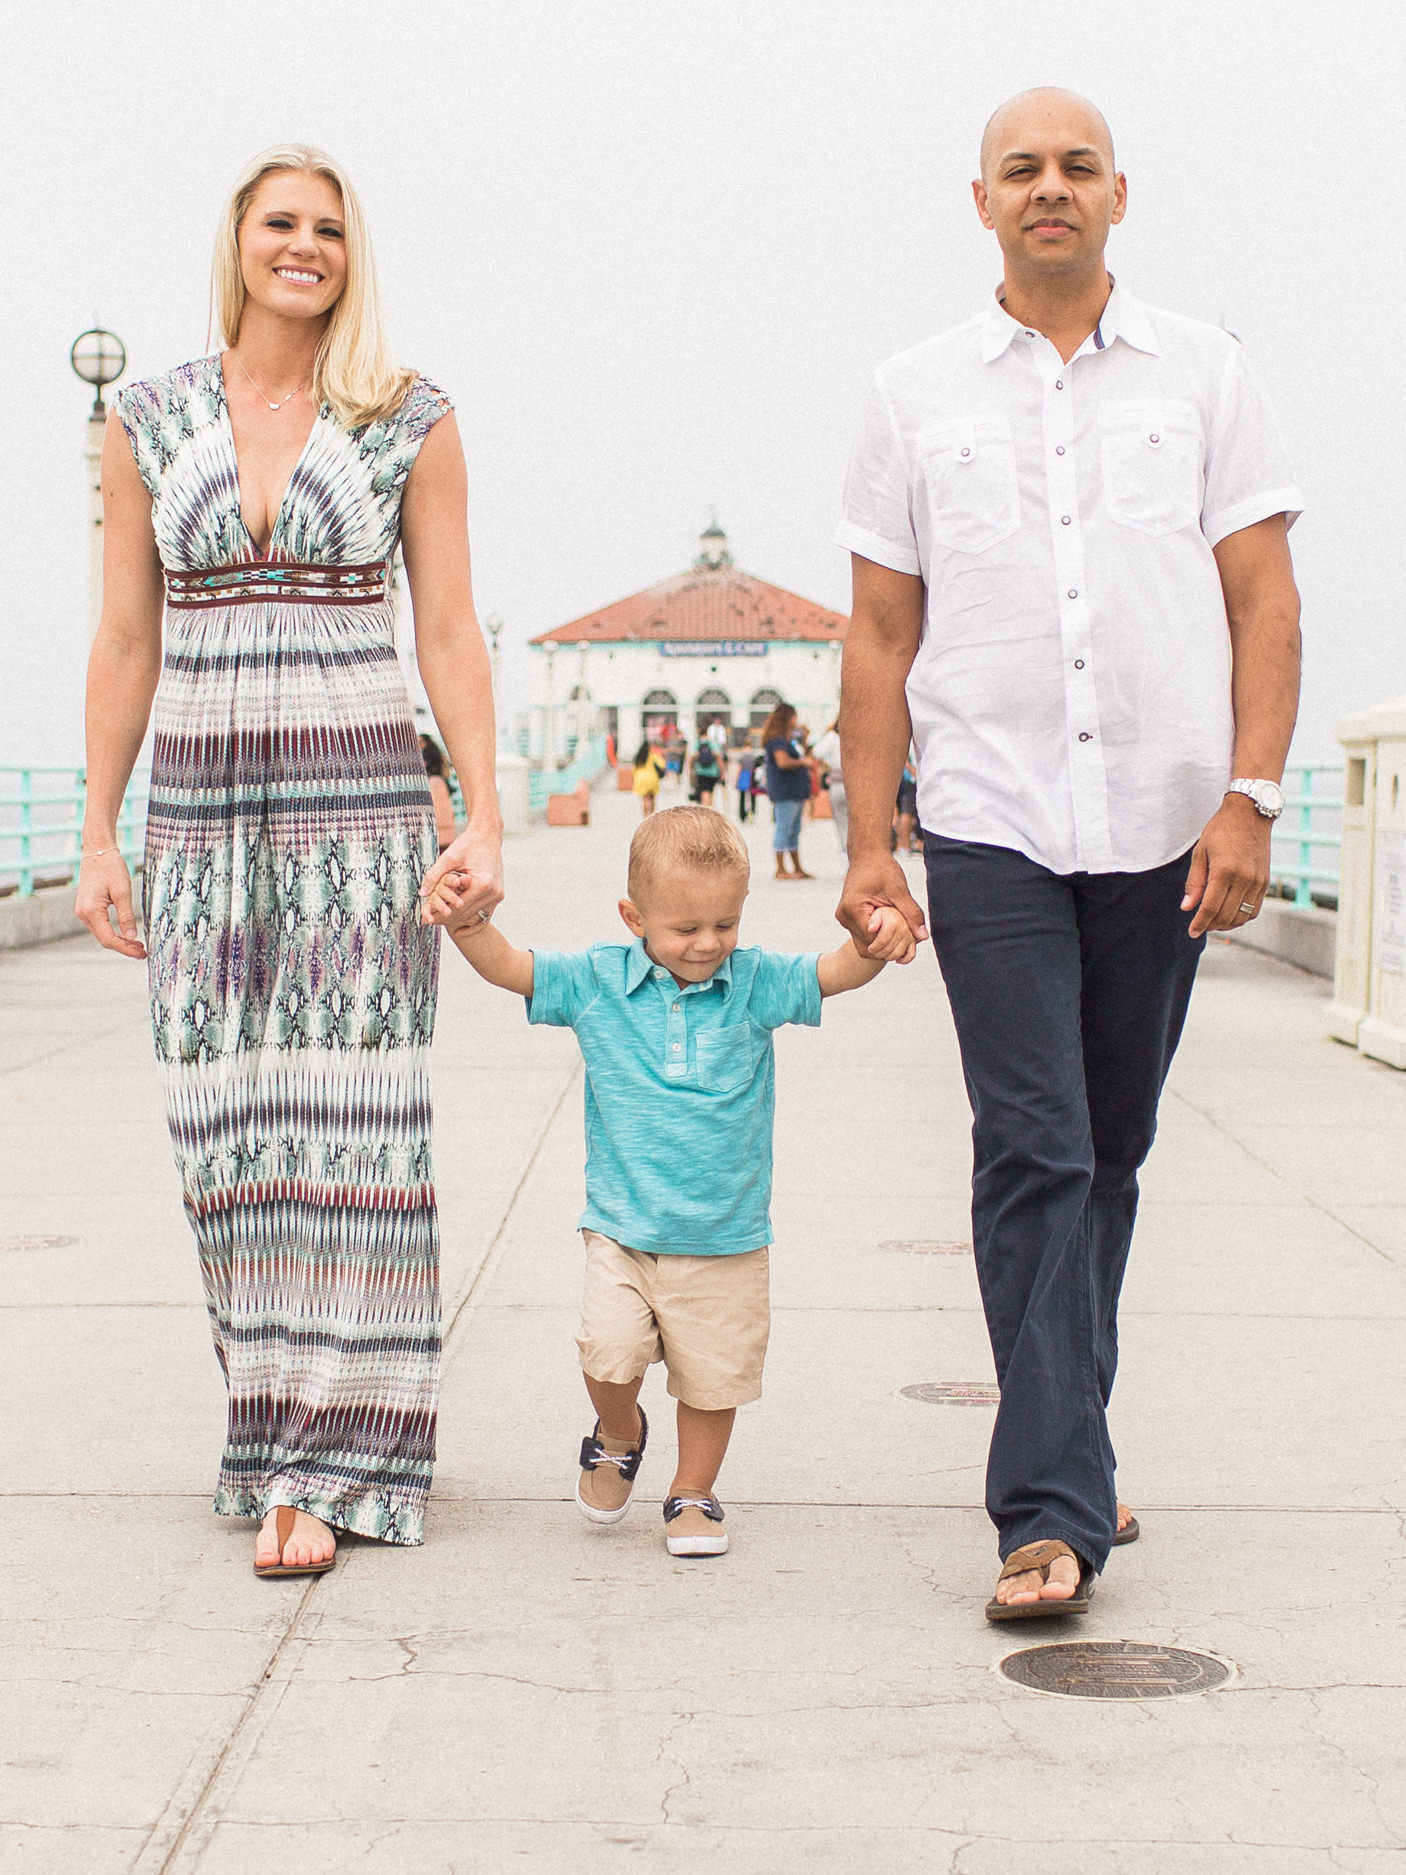  Manhattan Beach Krishnan Family Portrait Photography Session from South Bay family and wedding portrait photography business Daniel Doty Photography.  